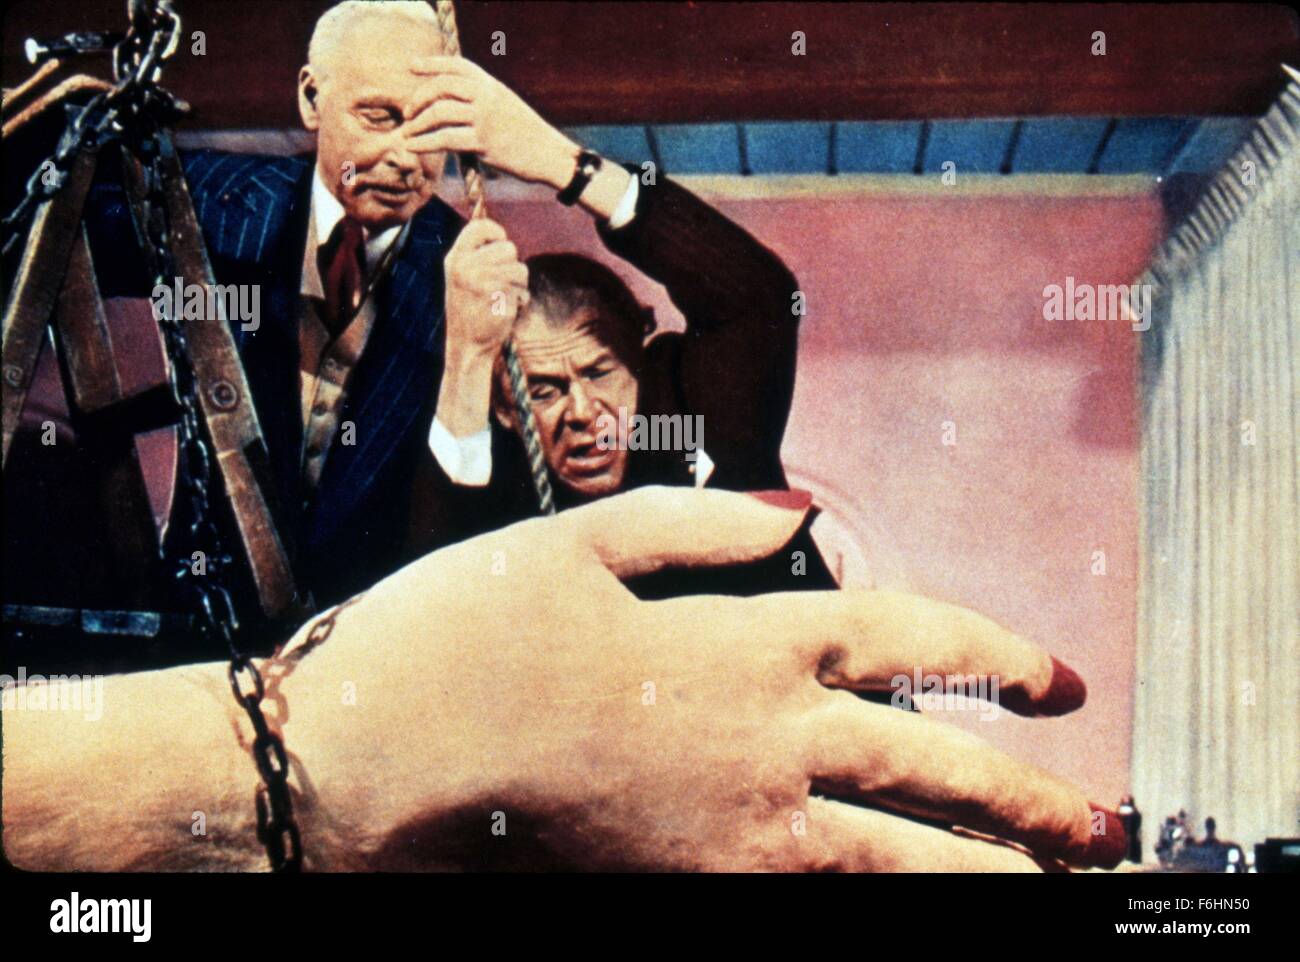 1957, Film Title: ATTACK OF THE 50, Director: NATHAN HERTZ, Studio: ALLIED ARTISTS, Pictured: ITS & ALIENS! THINGS, GIANT, WOMEN (EVIL/MEAN/DANGEROUS), FINGER NAILS, CAPTURE, SCI-FI, CAPTURED, BONDAGE, TIED UP, CONTAINMENT. (Credit Image: SNAP) Stock Photo